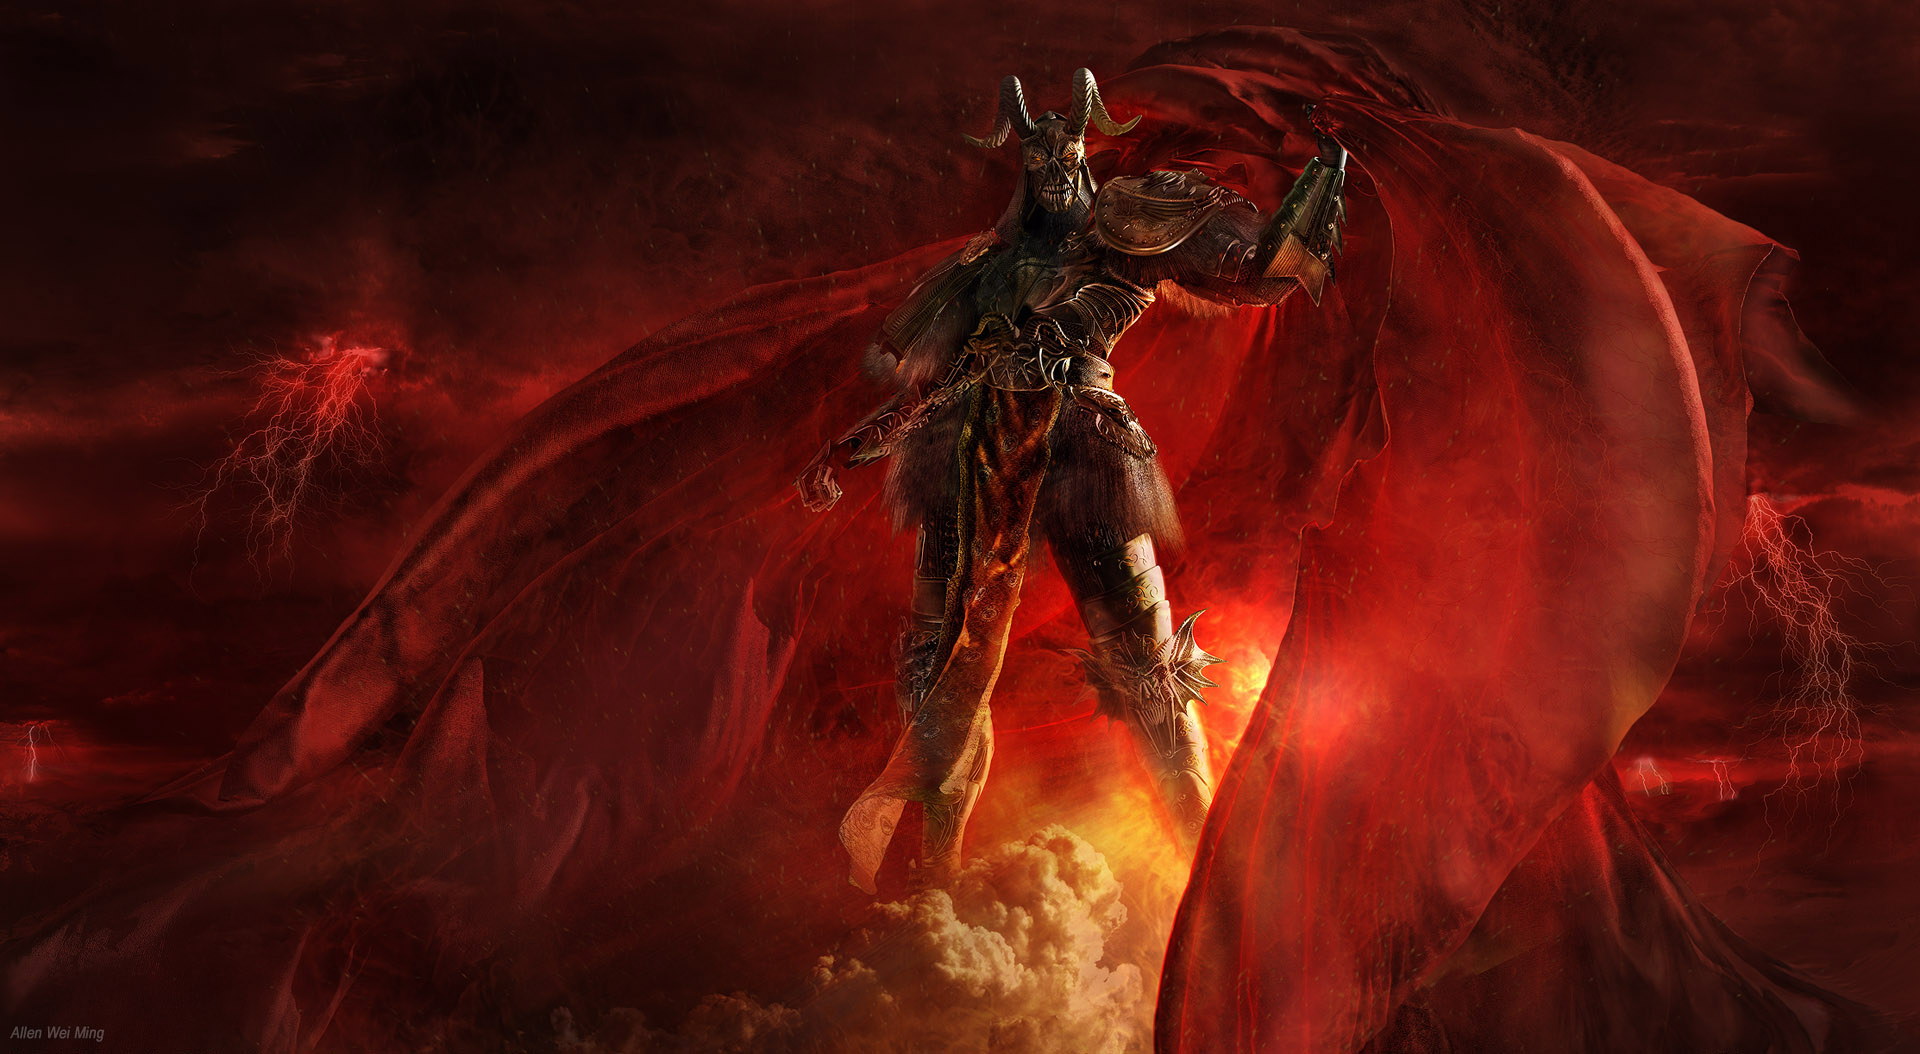 Judge Of Hell Background For Web Powerpoint Apps Arts Clip